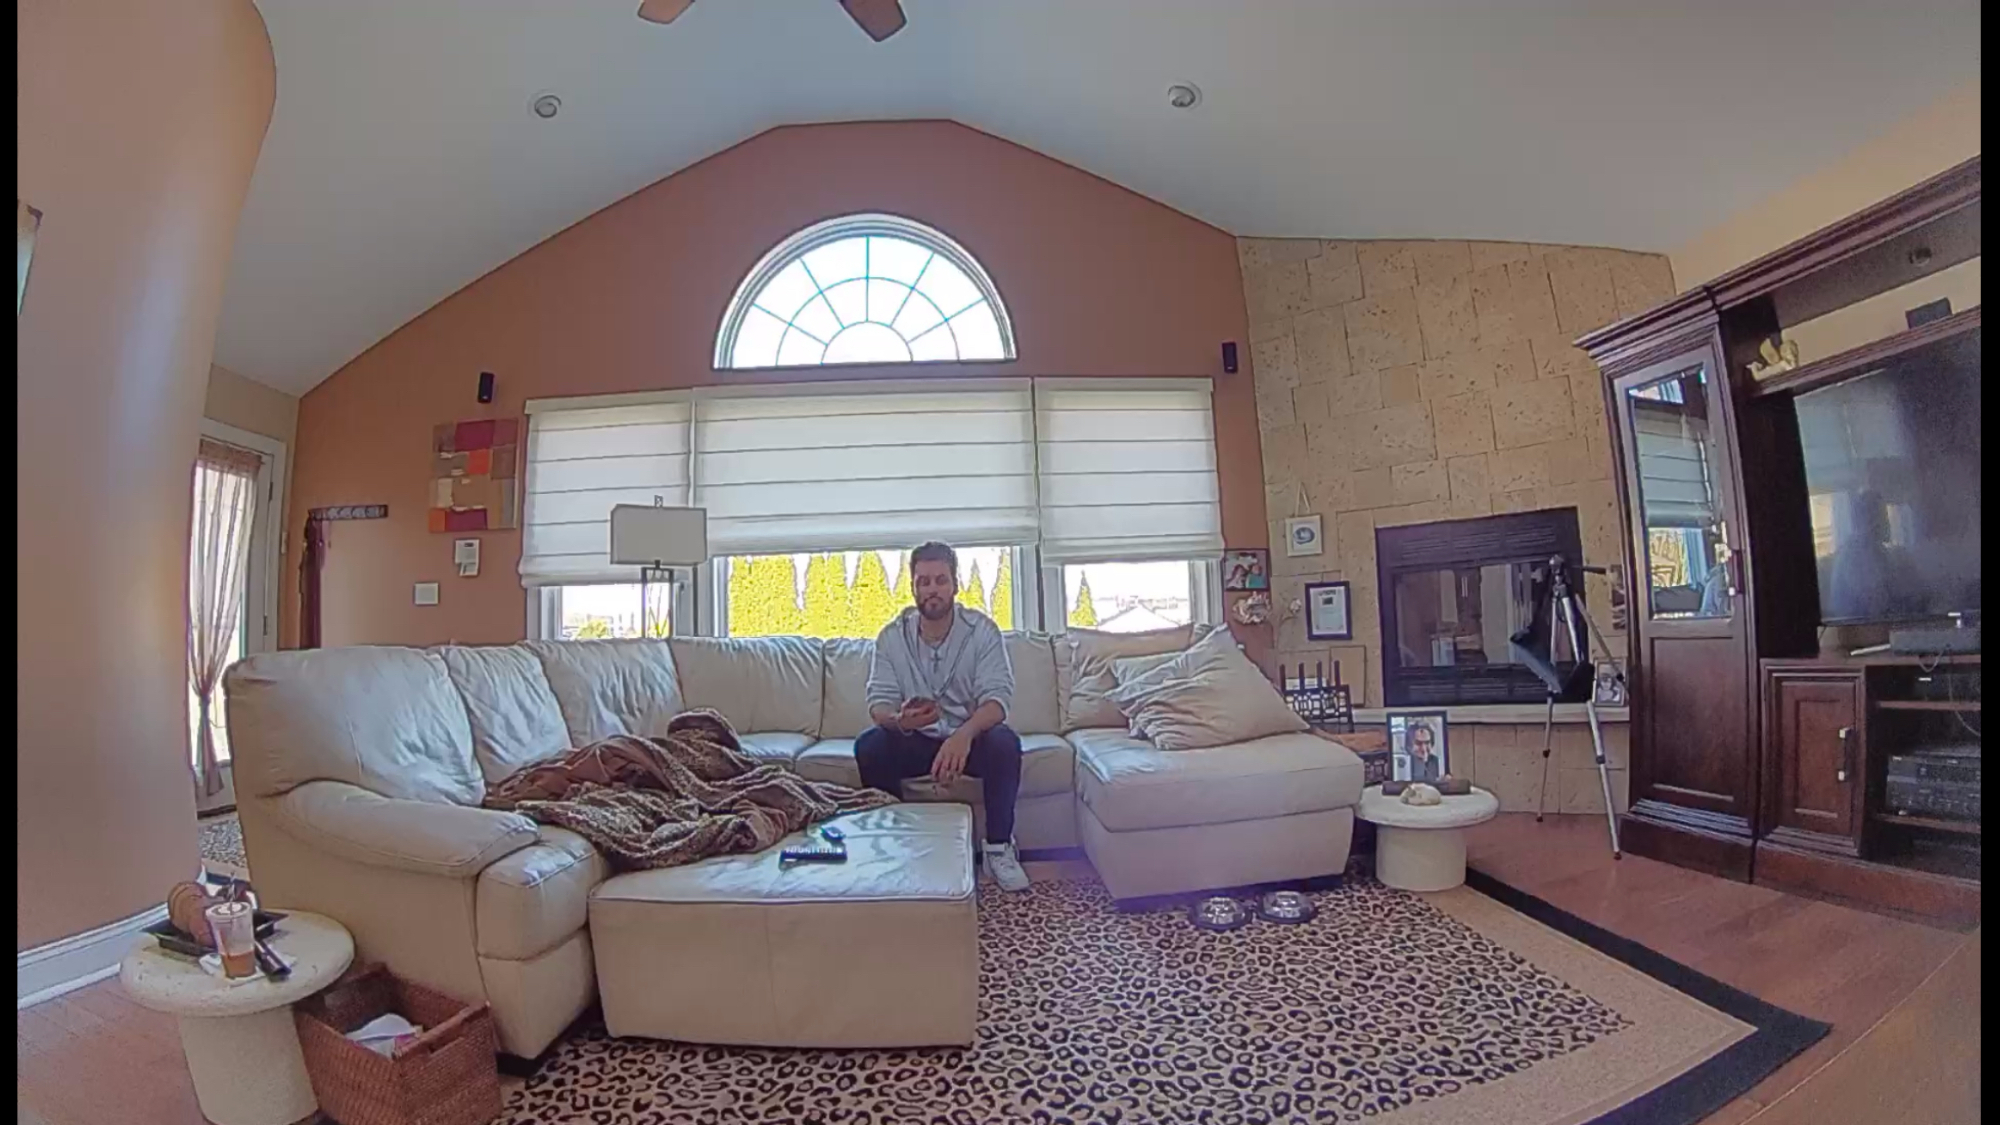 Ring Stick Up Pro Battery Cam captures man sitting on couch